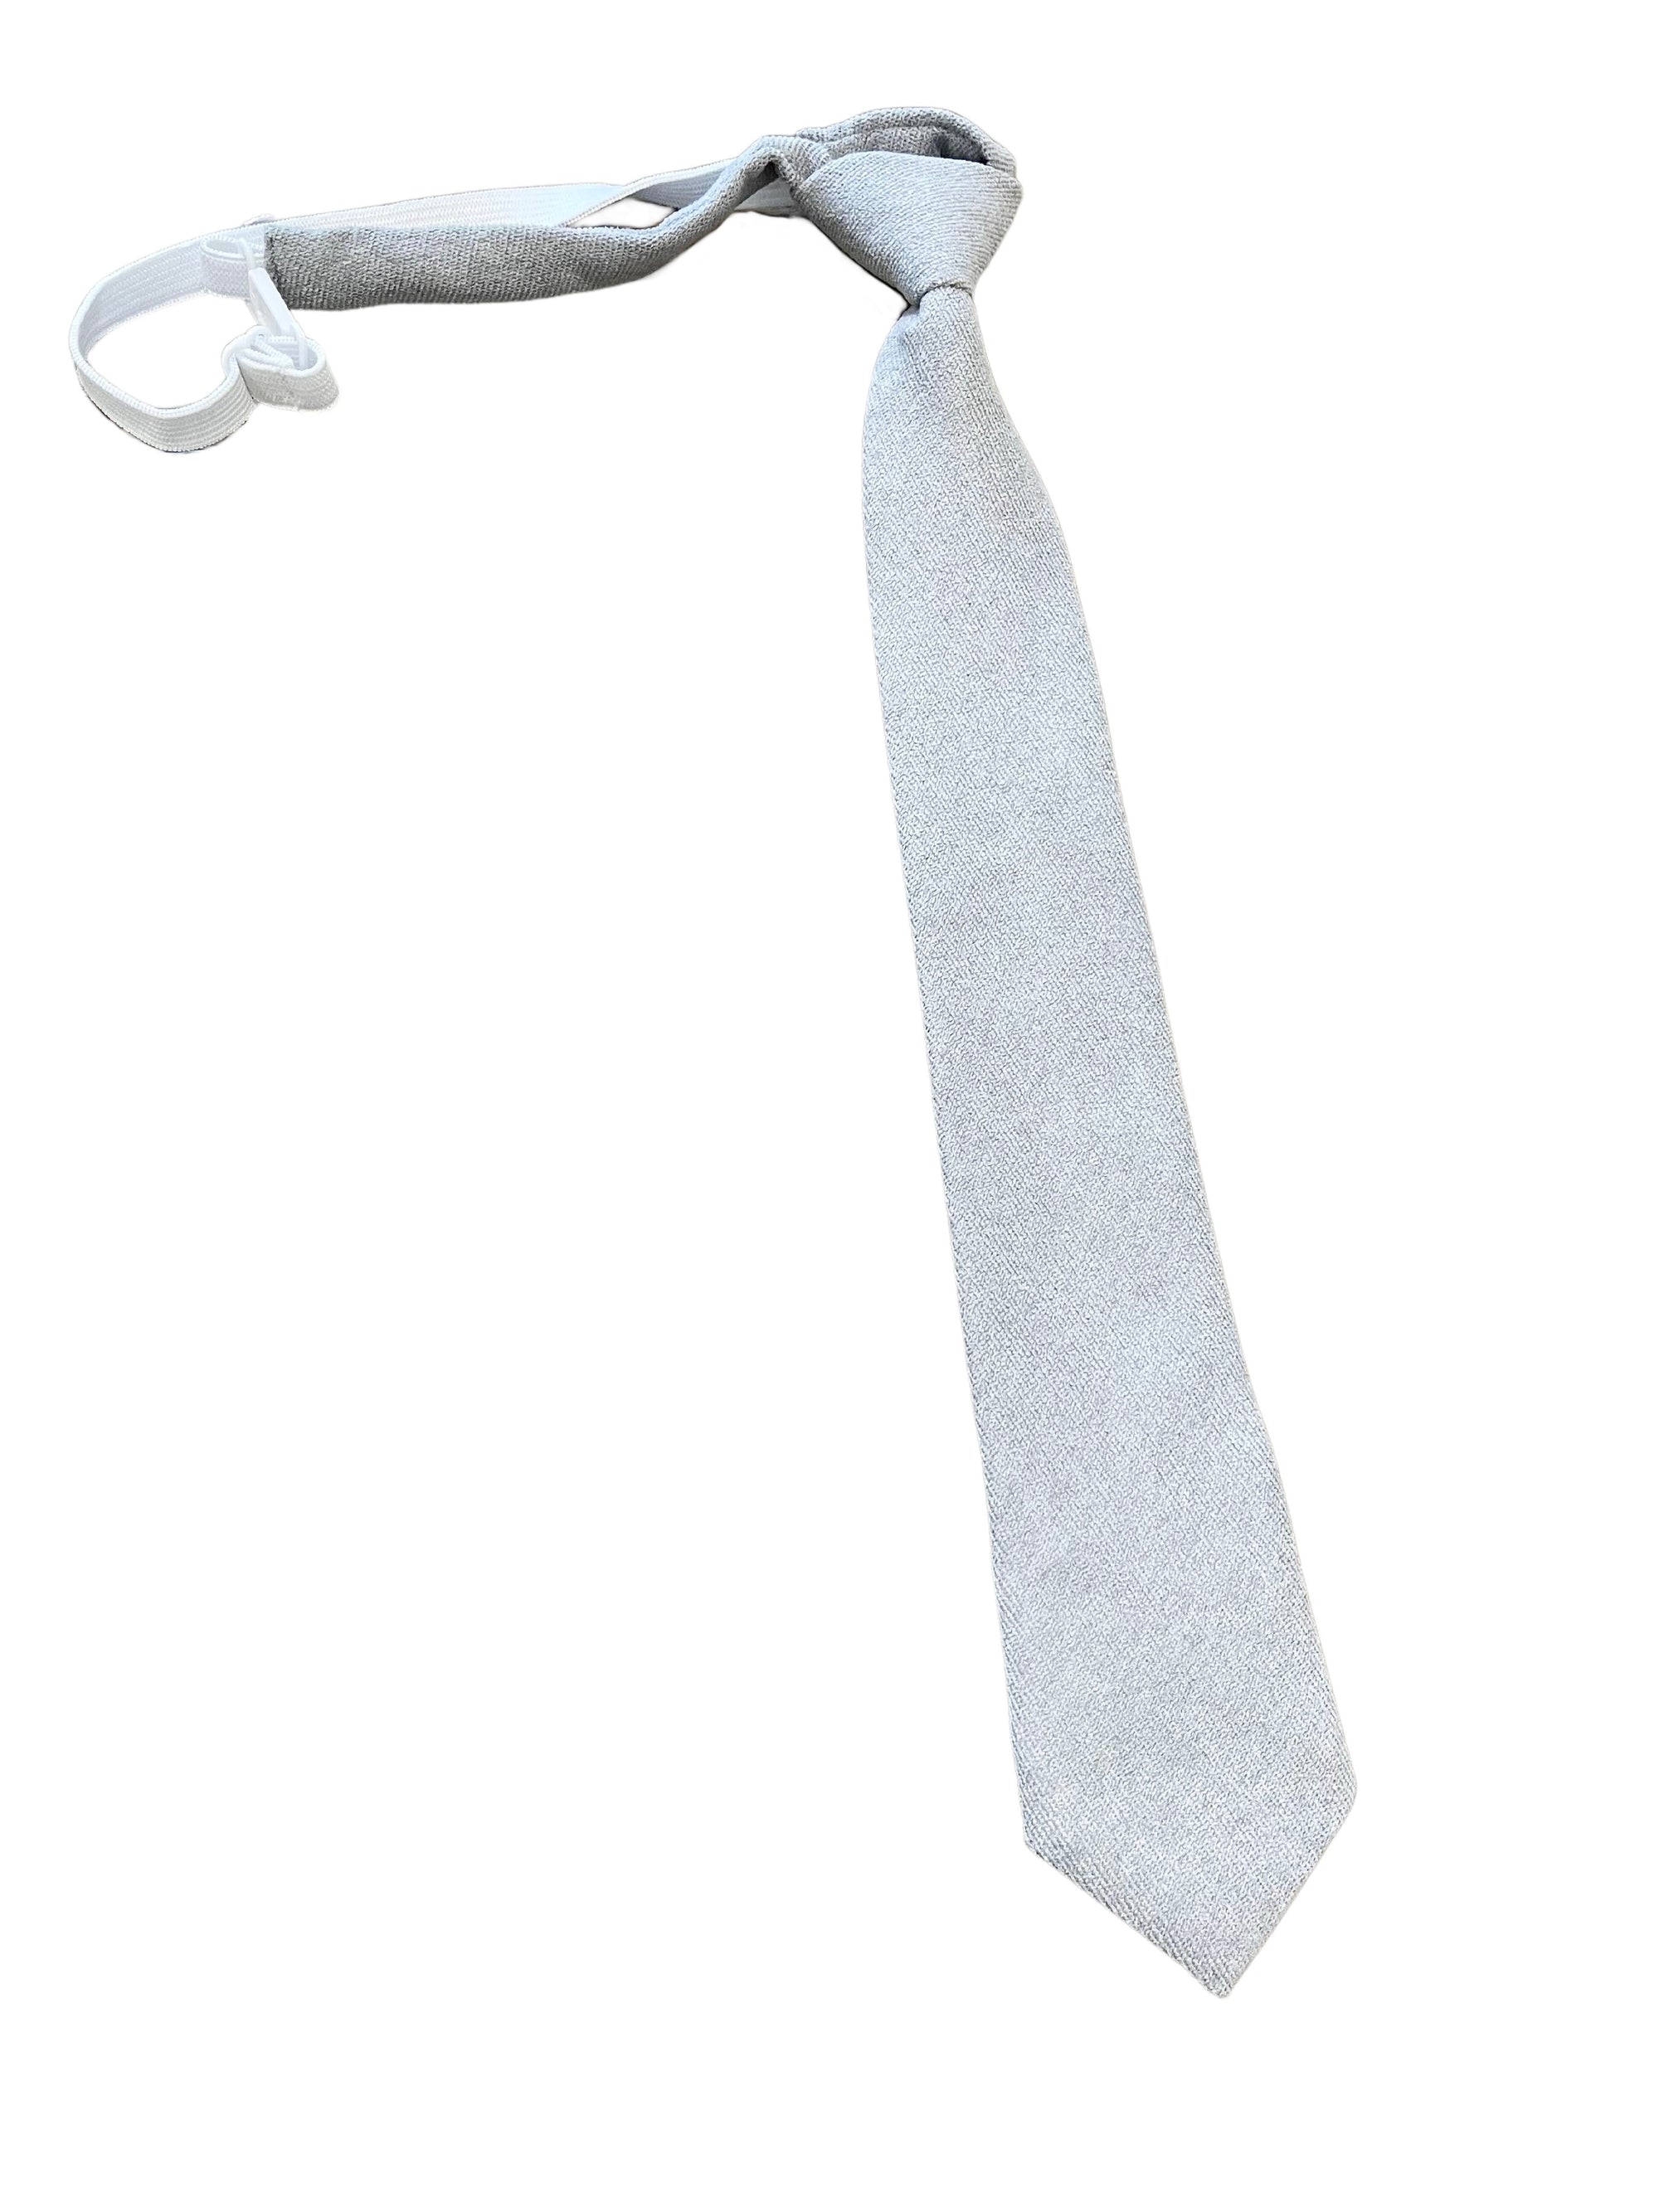 Gray Strap on Tie for Kids and Children ASTOR MYTIESHOP-Gray Strap on Tie for kids Material: Cotton Blend Color: Gray Approx Size: Max width: 6.5 cm / 2.4 inches Length: 14.56 Inches Looking for a stylish and convenient way to dress your little man for a special occasion? This clip on tie from ASTOR Kids is perfect for boys of all ages! Made from high quality materials, this tie is perfect for weddings, ring bearer duties, or any other formal event. The gray clip on tie is easy to put on and tak